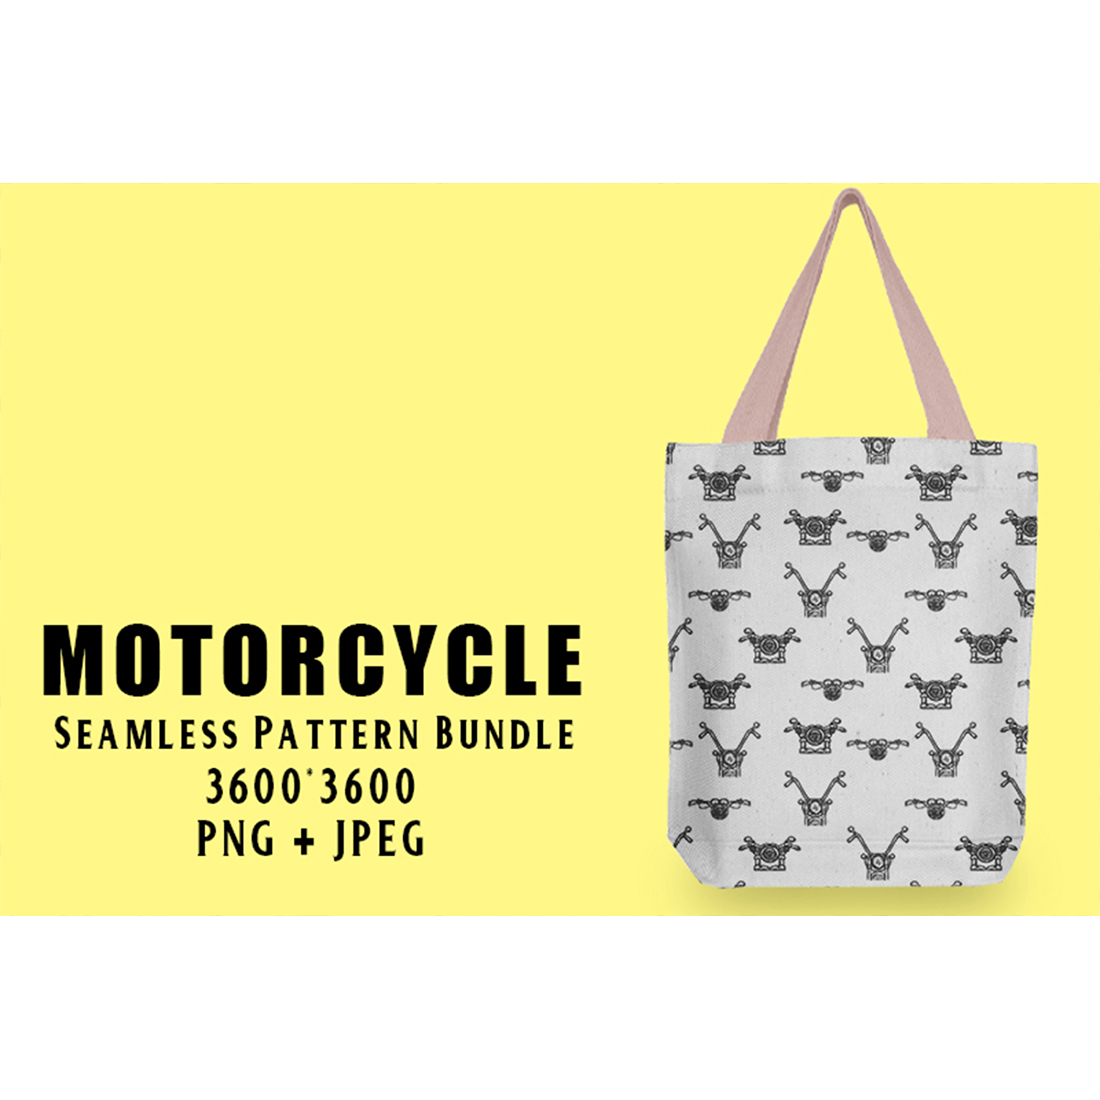 Image of a bag with exquisite patterns with motorcycles